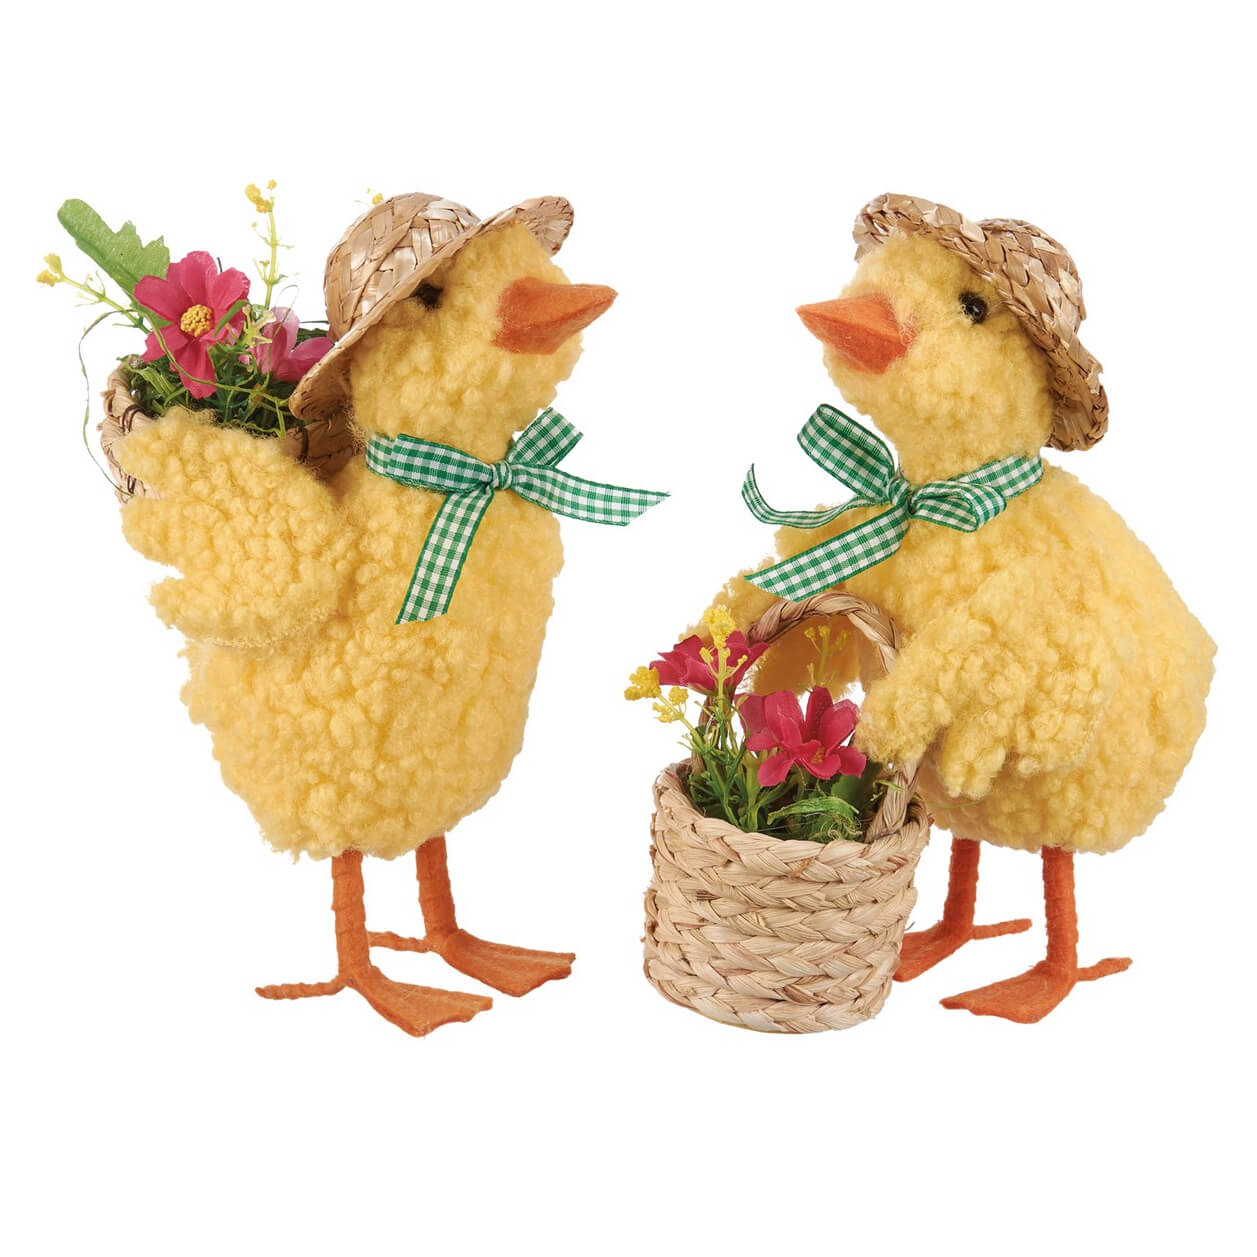 Moss Basket with Animal and Flowers by Valerie ,Duckling